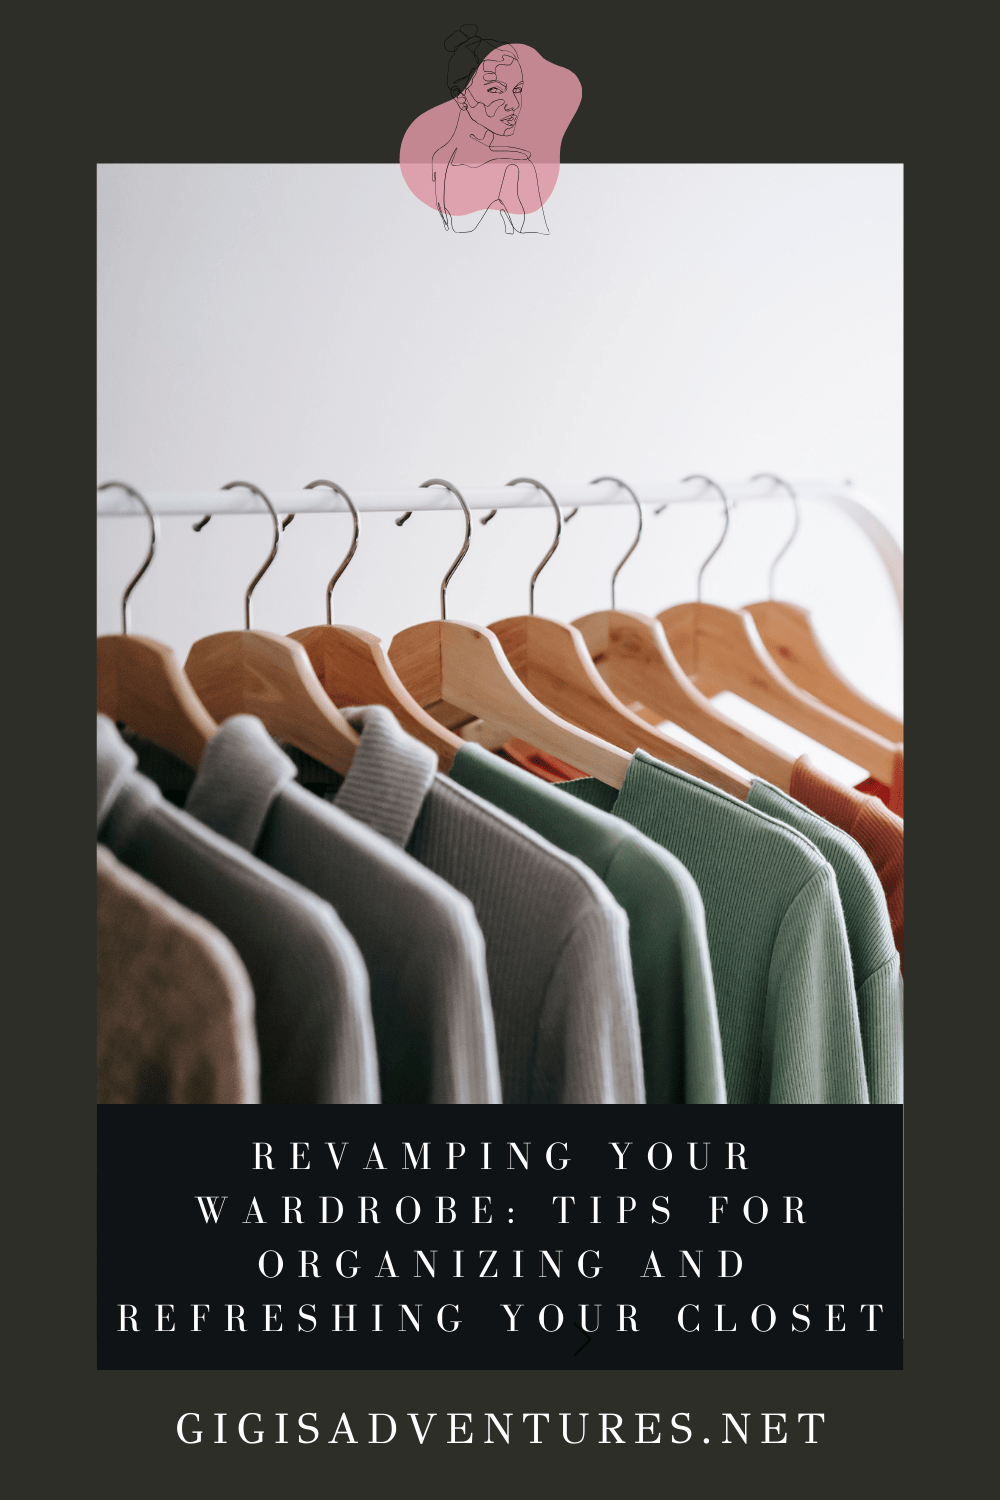 Revamping Your Wardrobe Tips for Organizing and Refreshing Your Closet